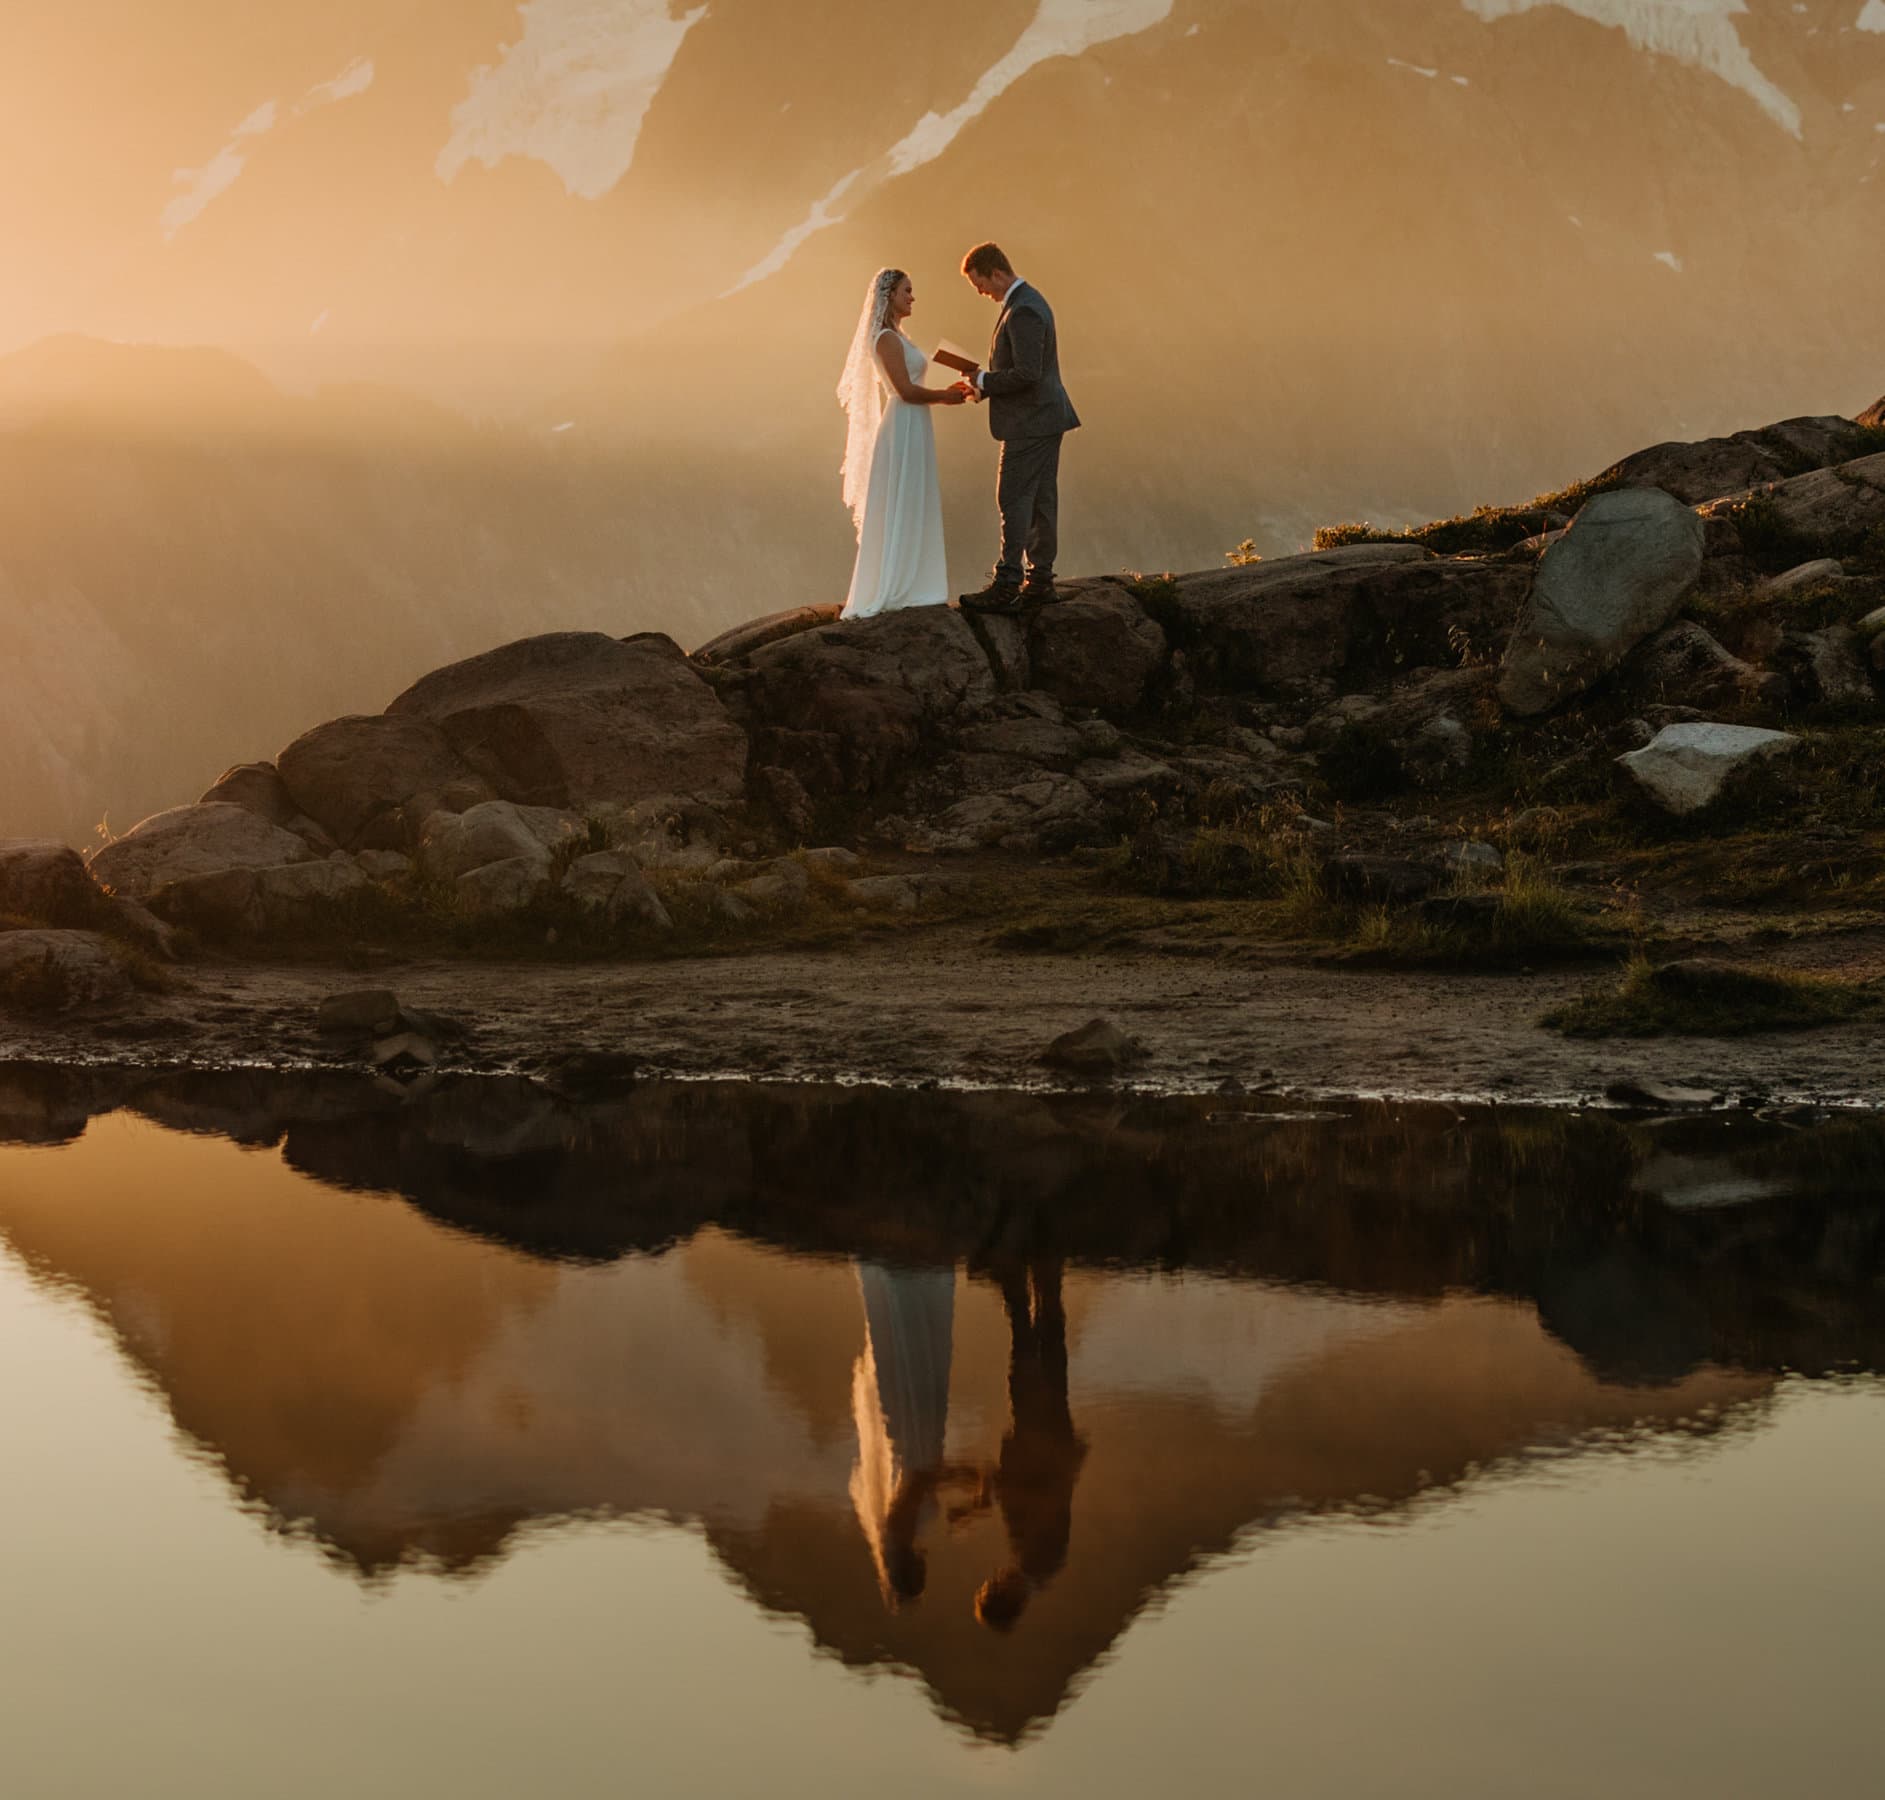 The couple shares private vows as the sun rises behind the mountain.